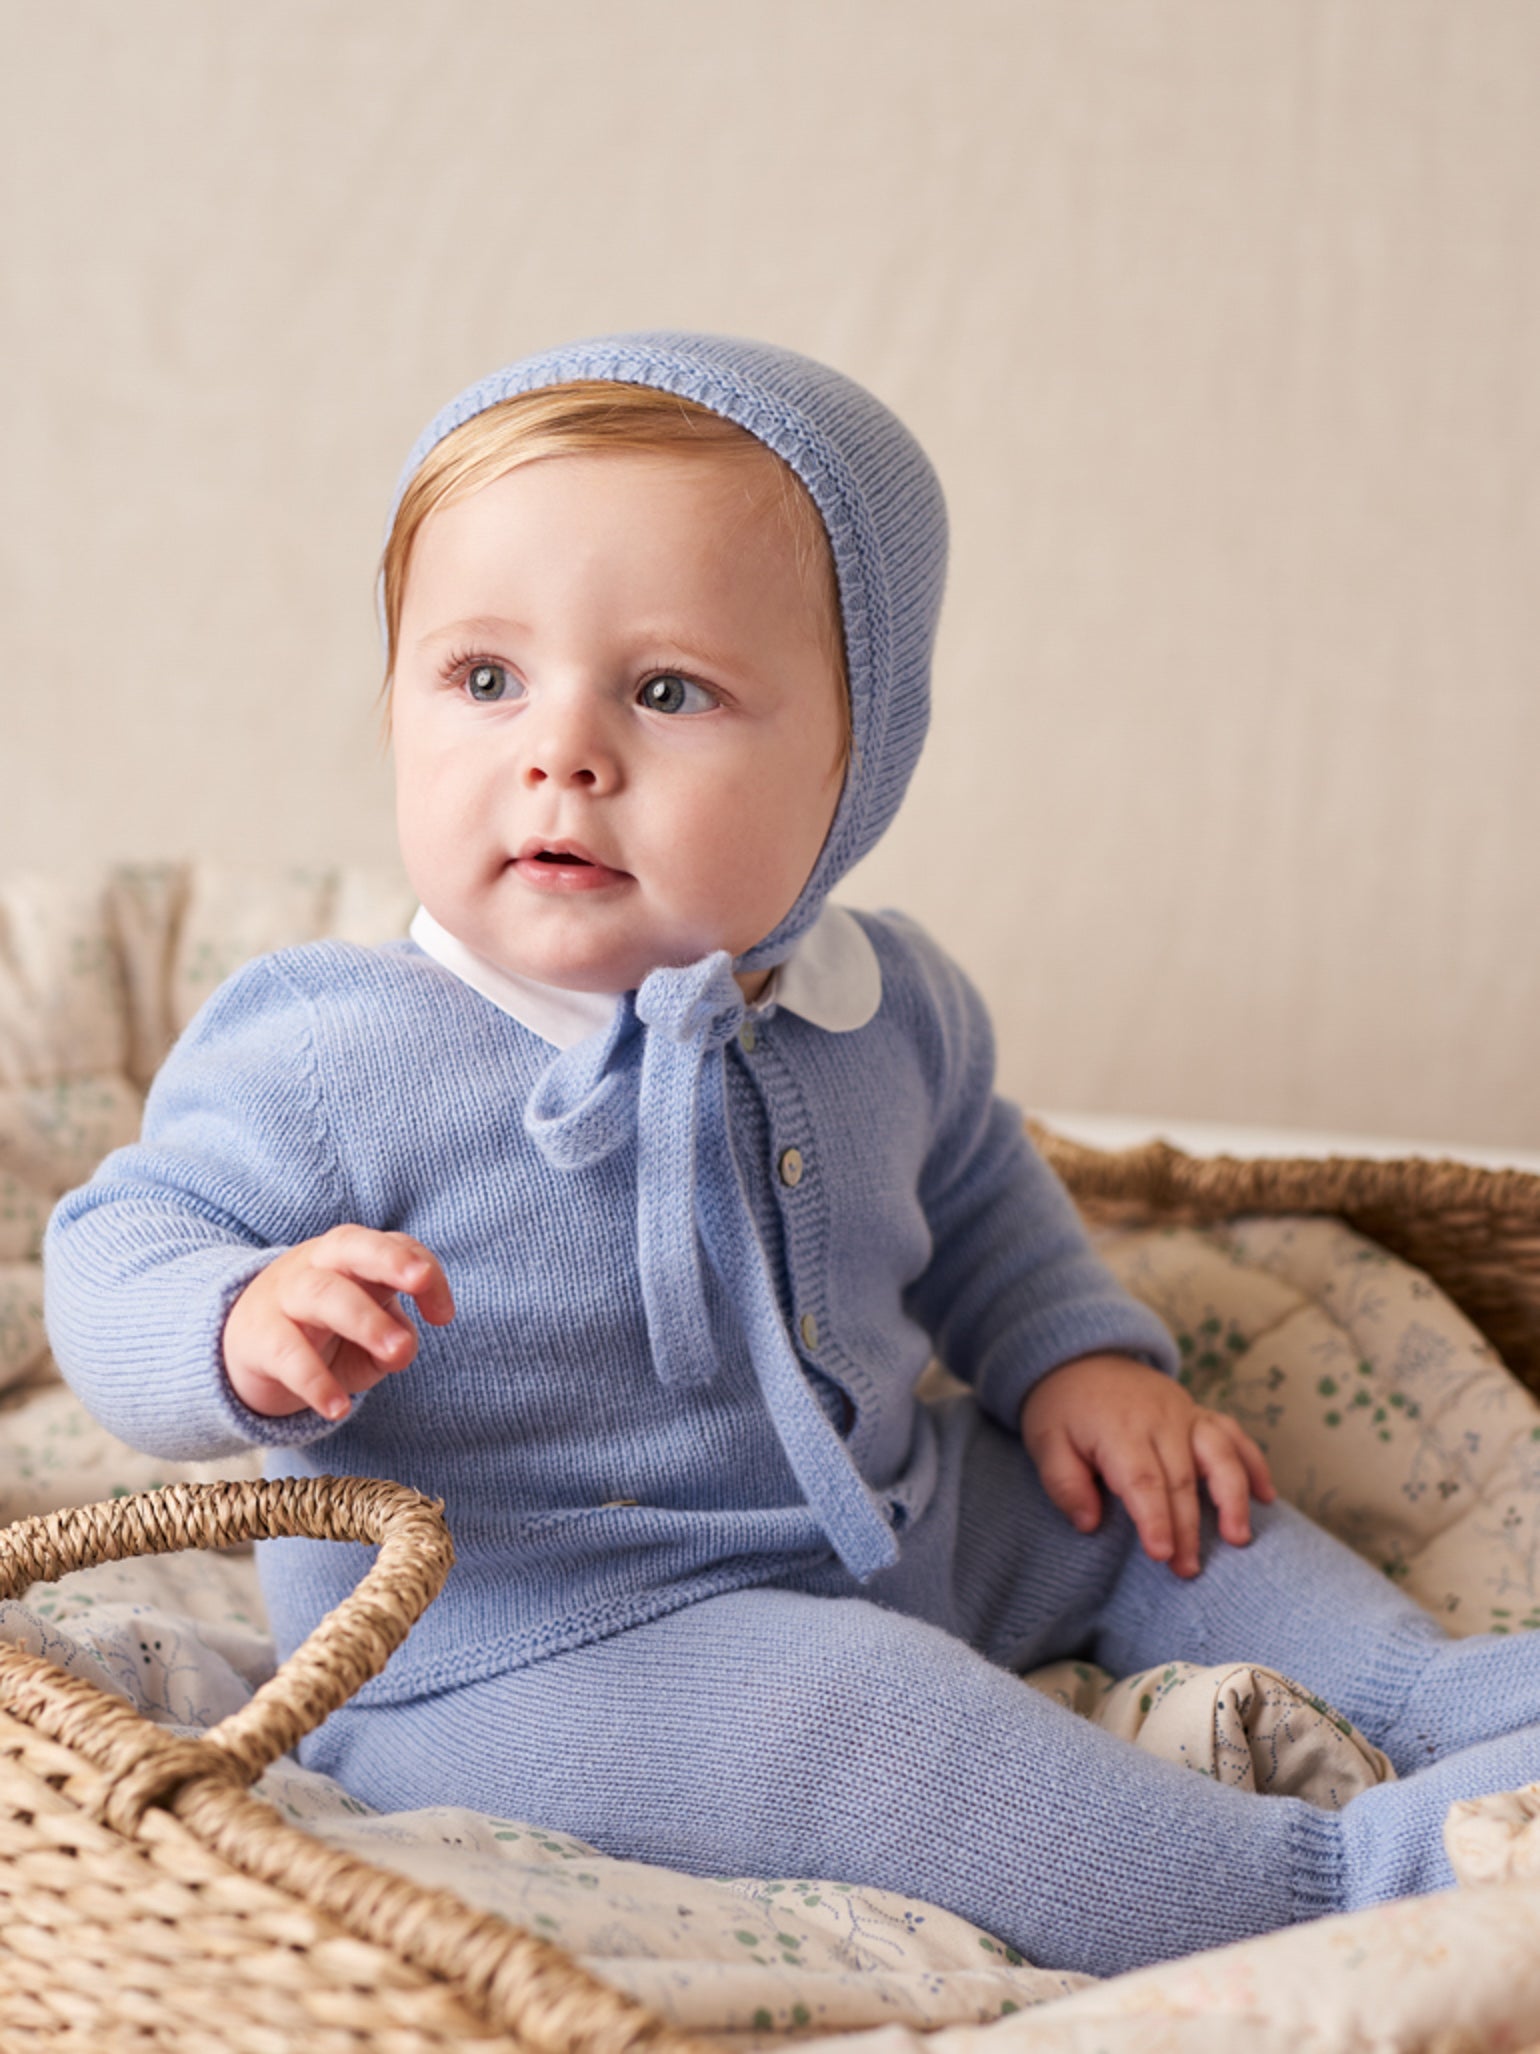 Our 5 Top Tips For Buying Infant Clothing | Top Kids Clothing Store In NZ